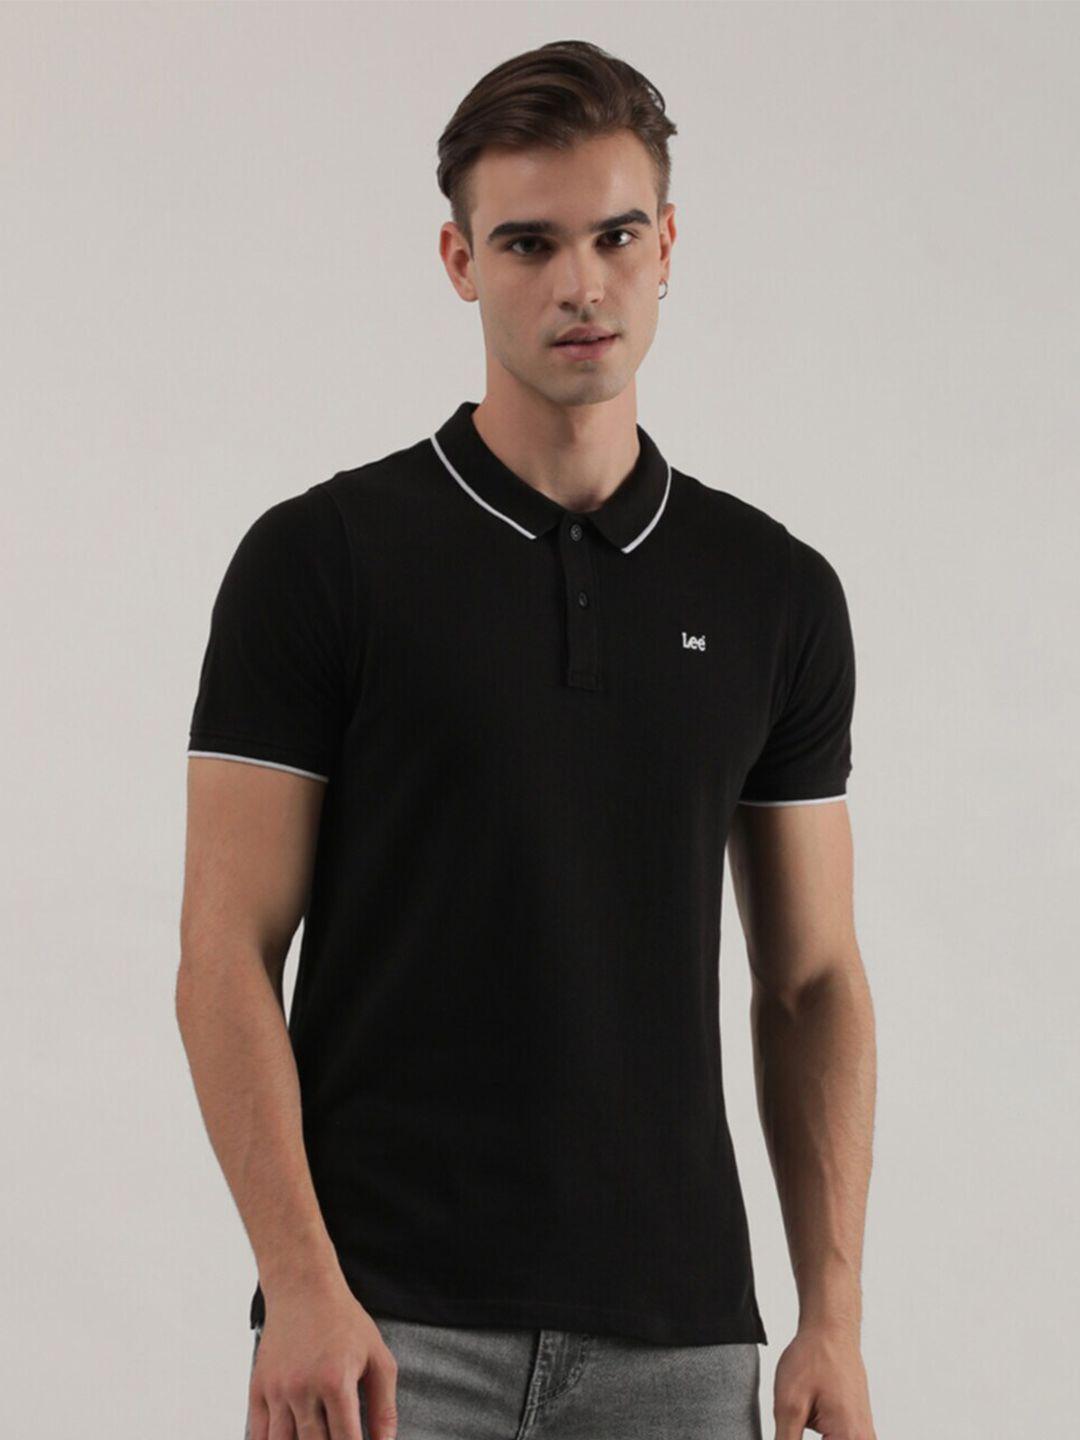 lee-polo-collar-cotton-slim-fit-t-shirt